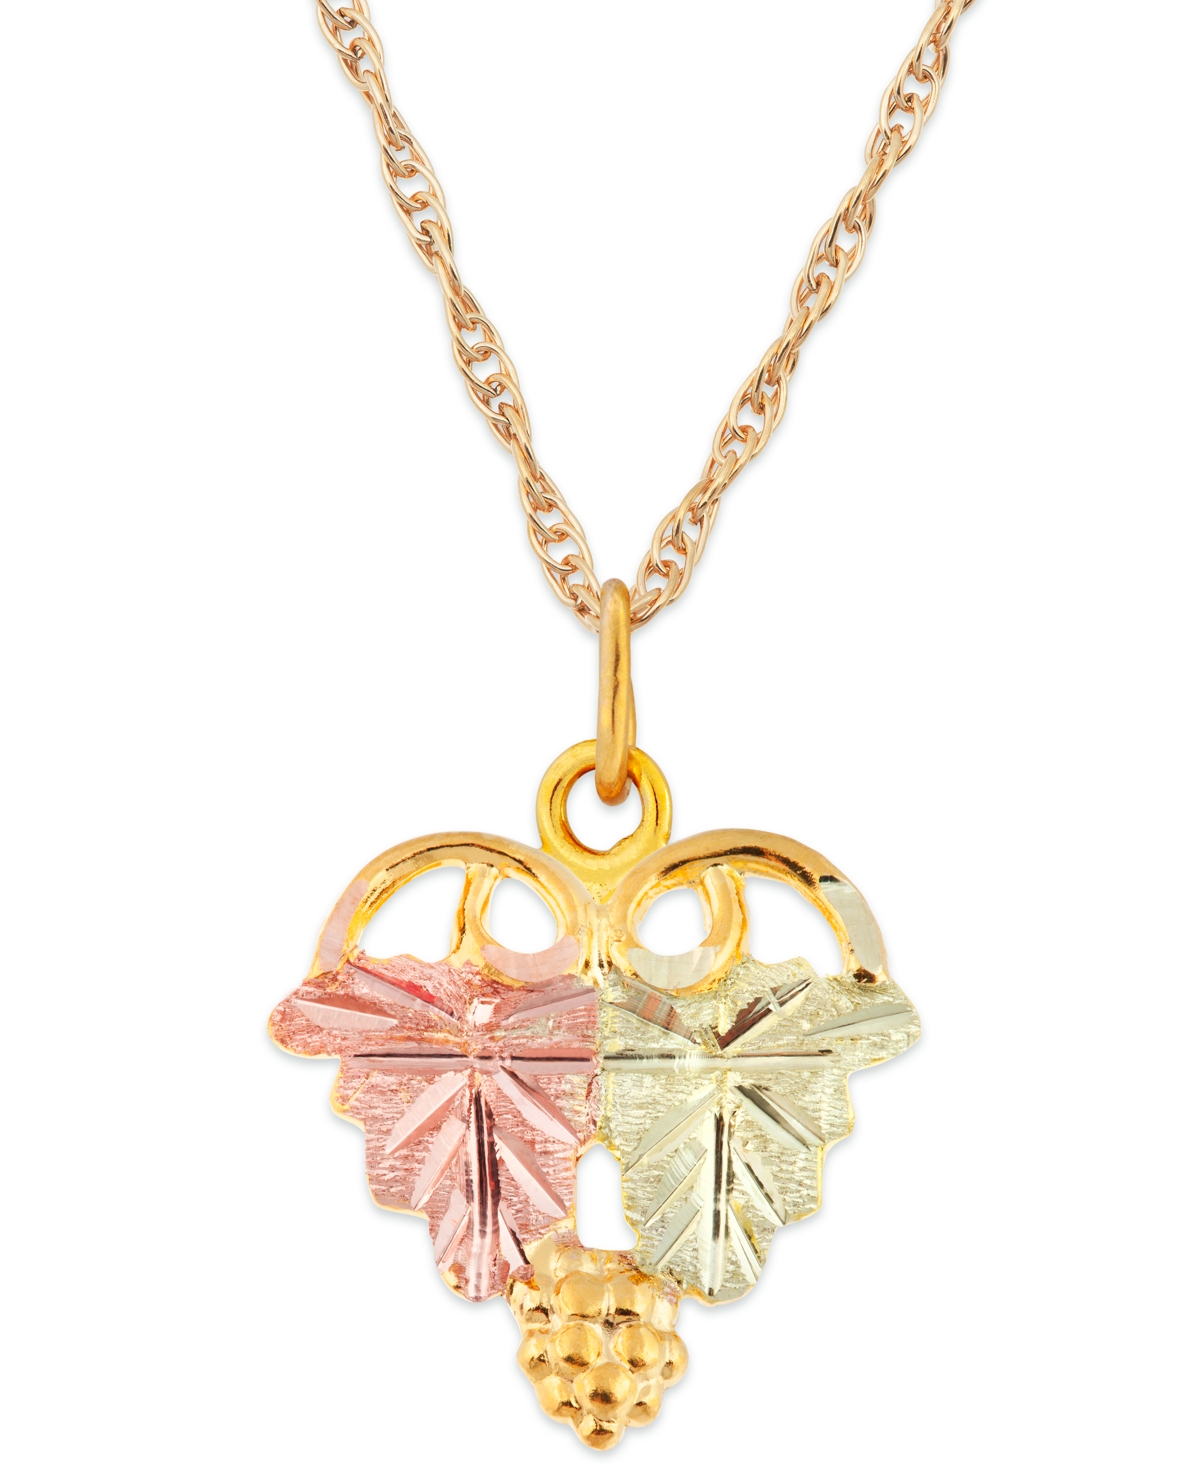 Grape and Leaf Pendant in 10k Yellow Gold with 12k Rose and Green Gold - Mlti Gold